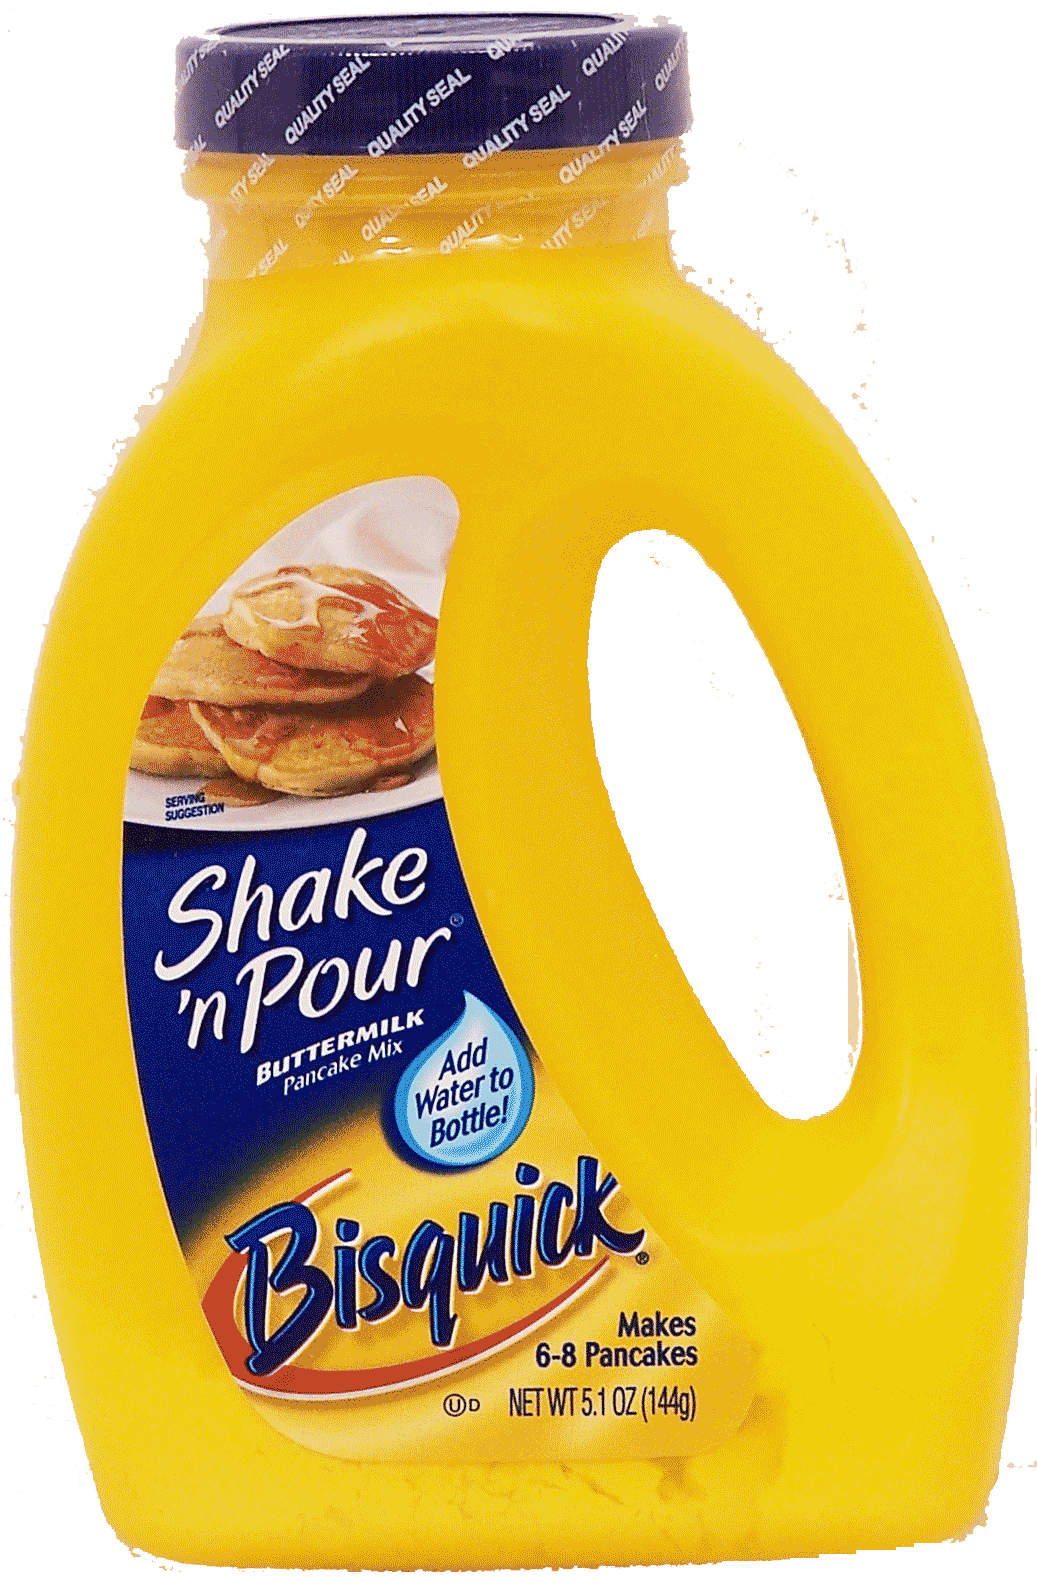 Bisquick Shake 'n Pour buttermilk pancake mix, makes 6-8 pancakes Full-Size Picture